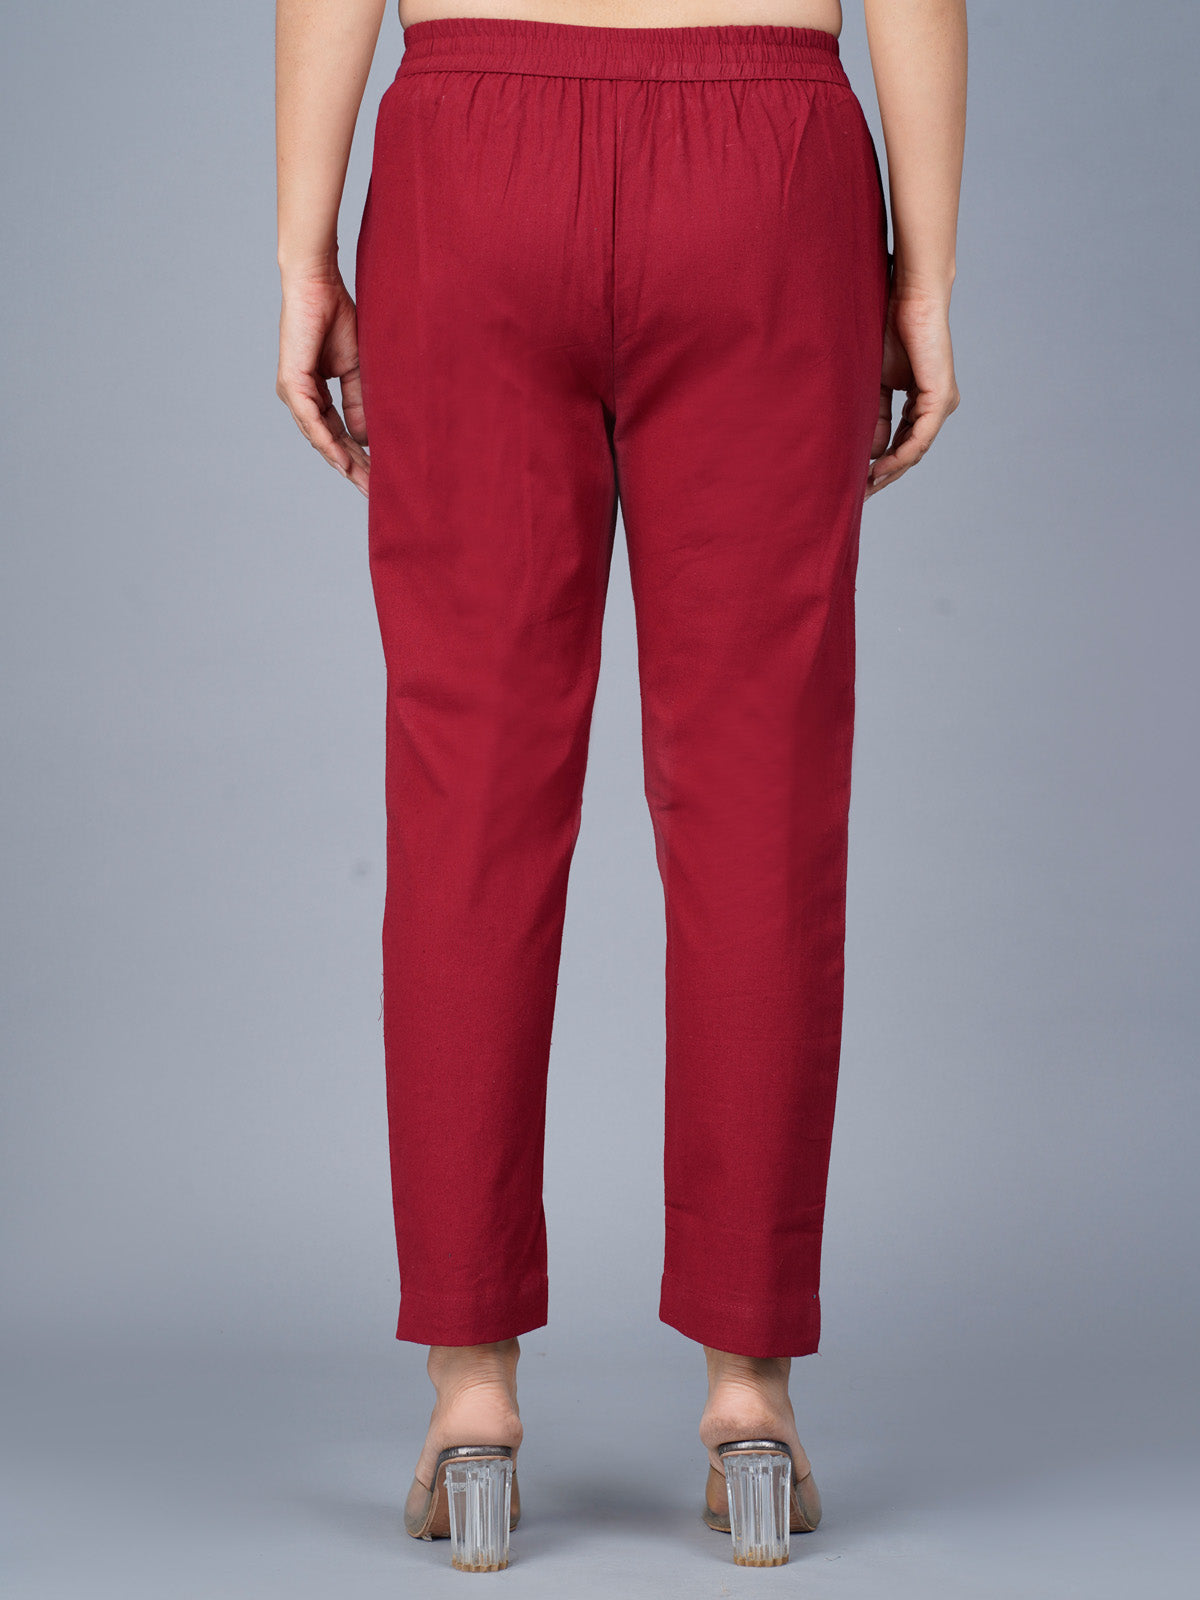 Pack Of 2 Womens Regular Fit Maroon And Navy Blue Fully Elastic Waistband Cotton Trouser